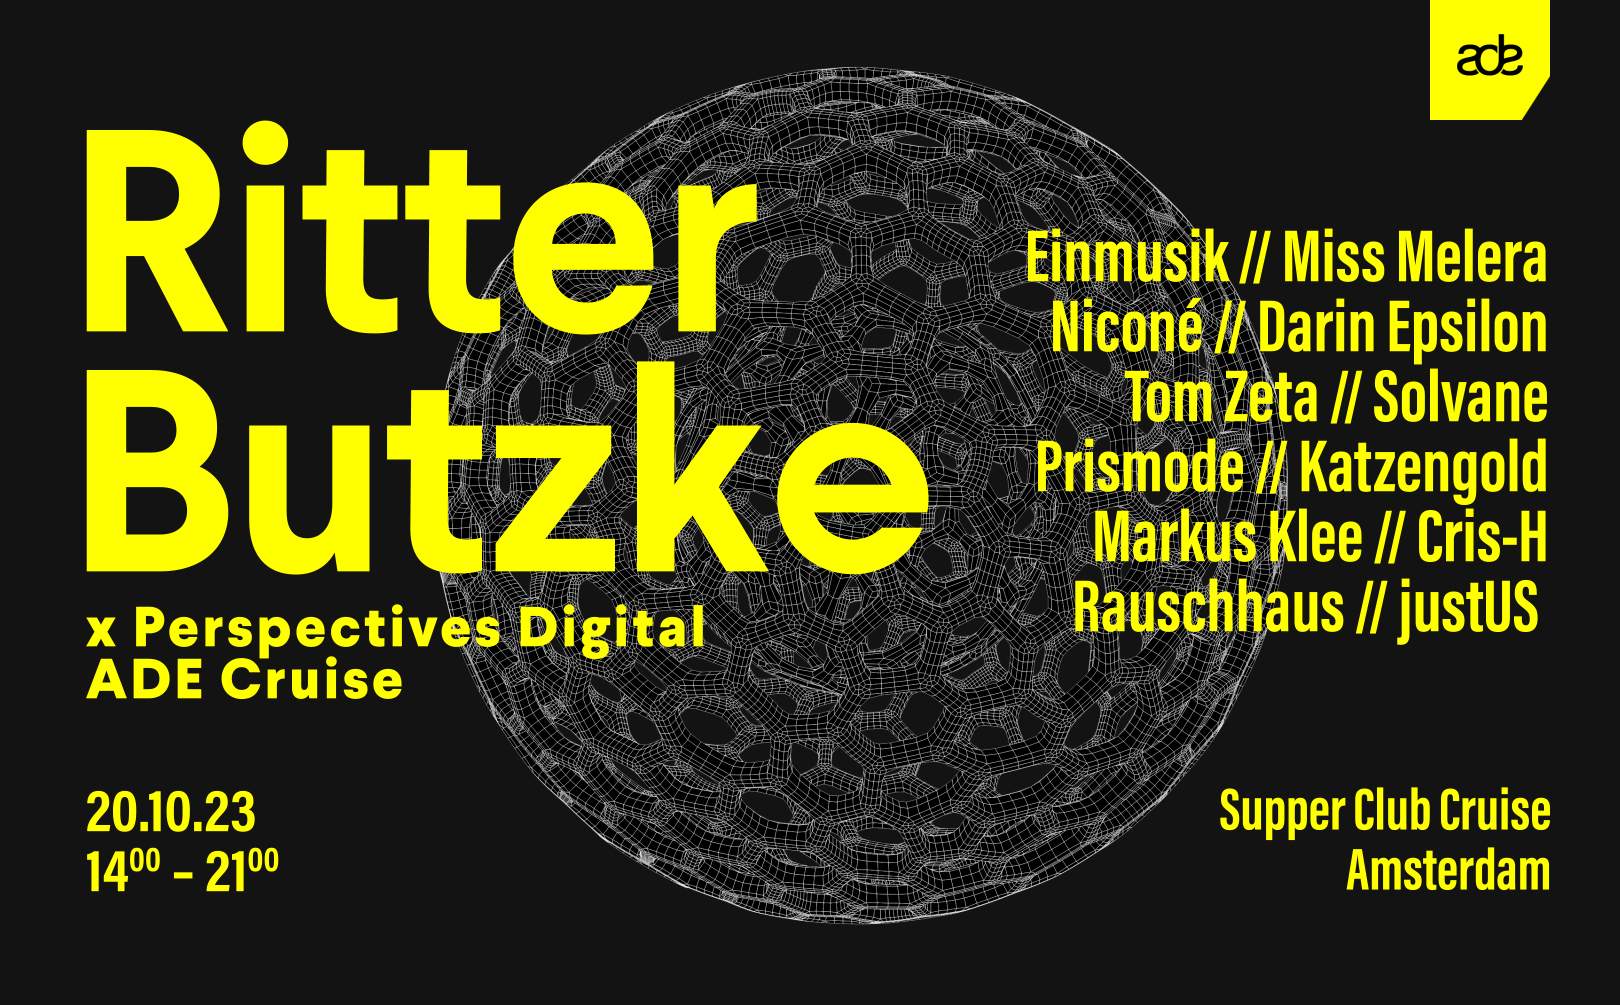 sold out / Ritter Butzke x Perspectives Digital ADE Cruise - フライヤー表